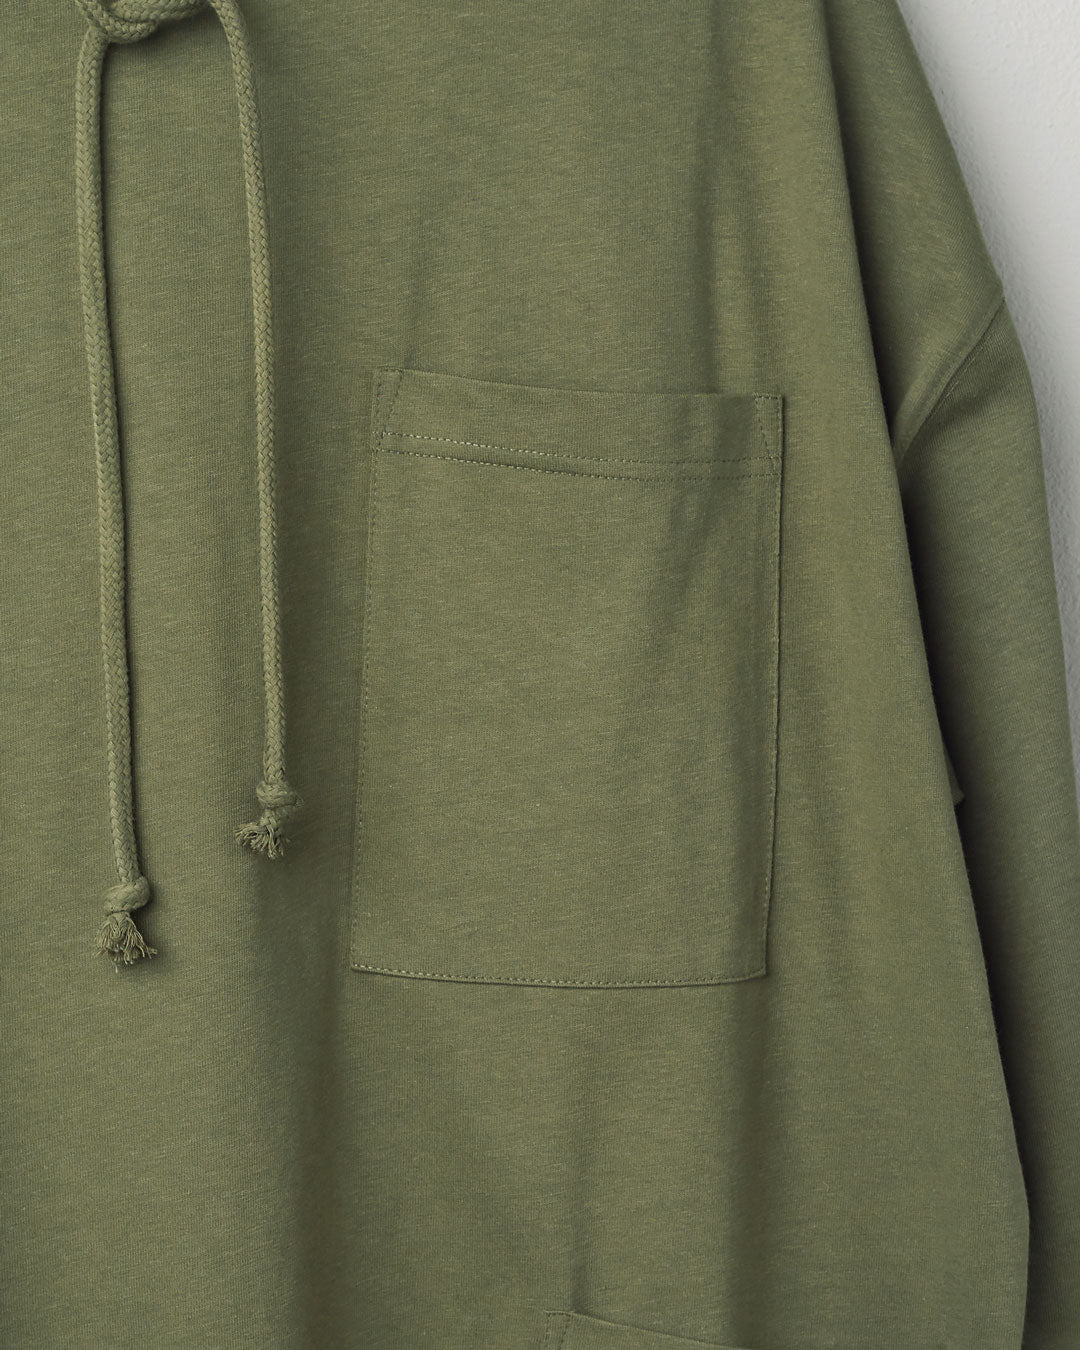 Close-up, top-right view of #3032 army green smock from Uskees showing large breast pocket and adjustable drawstring.